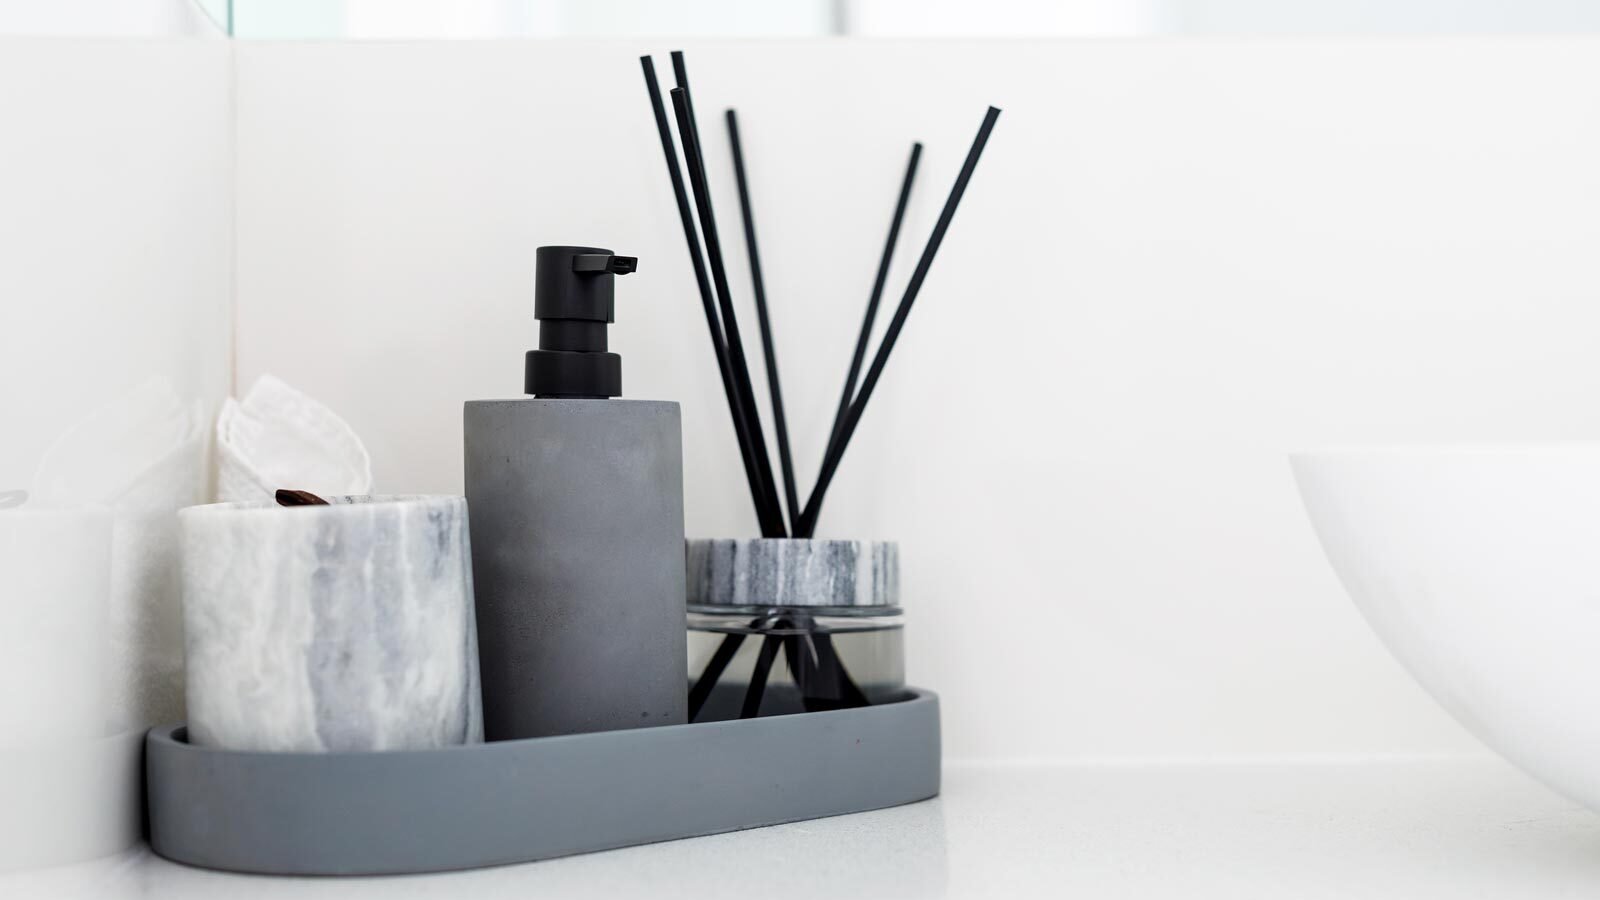 A marble and grey bathroom accessory set featuring a cup, lotion dispenser and oil diffuser